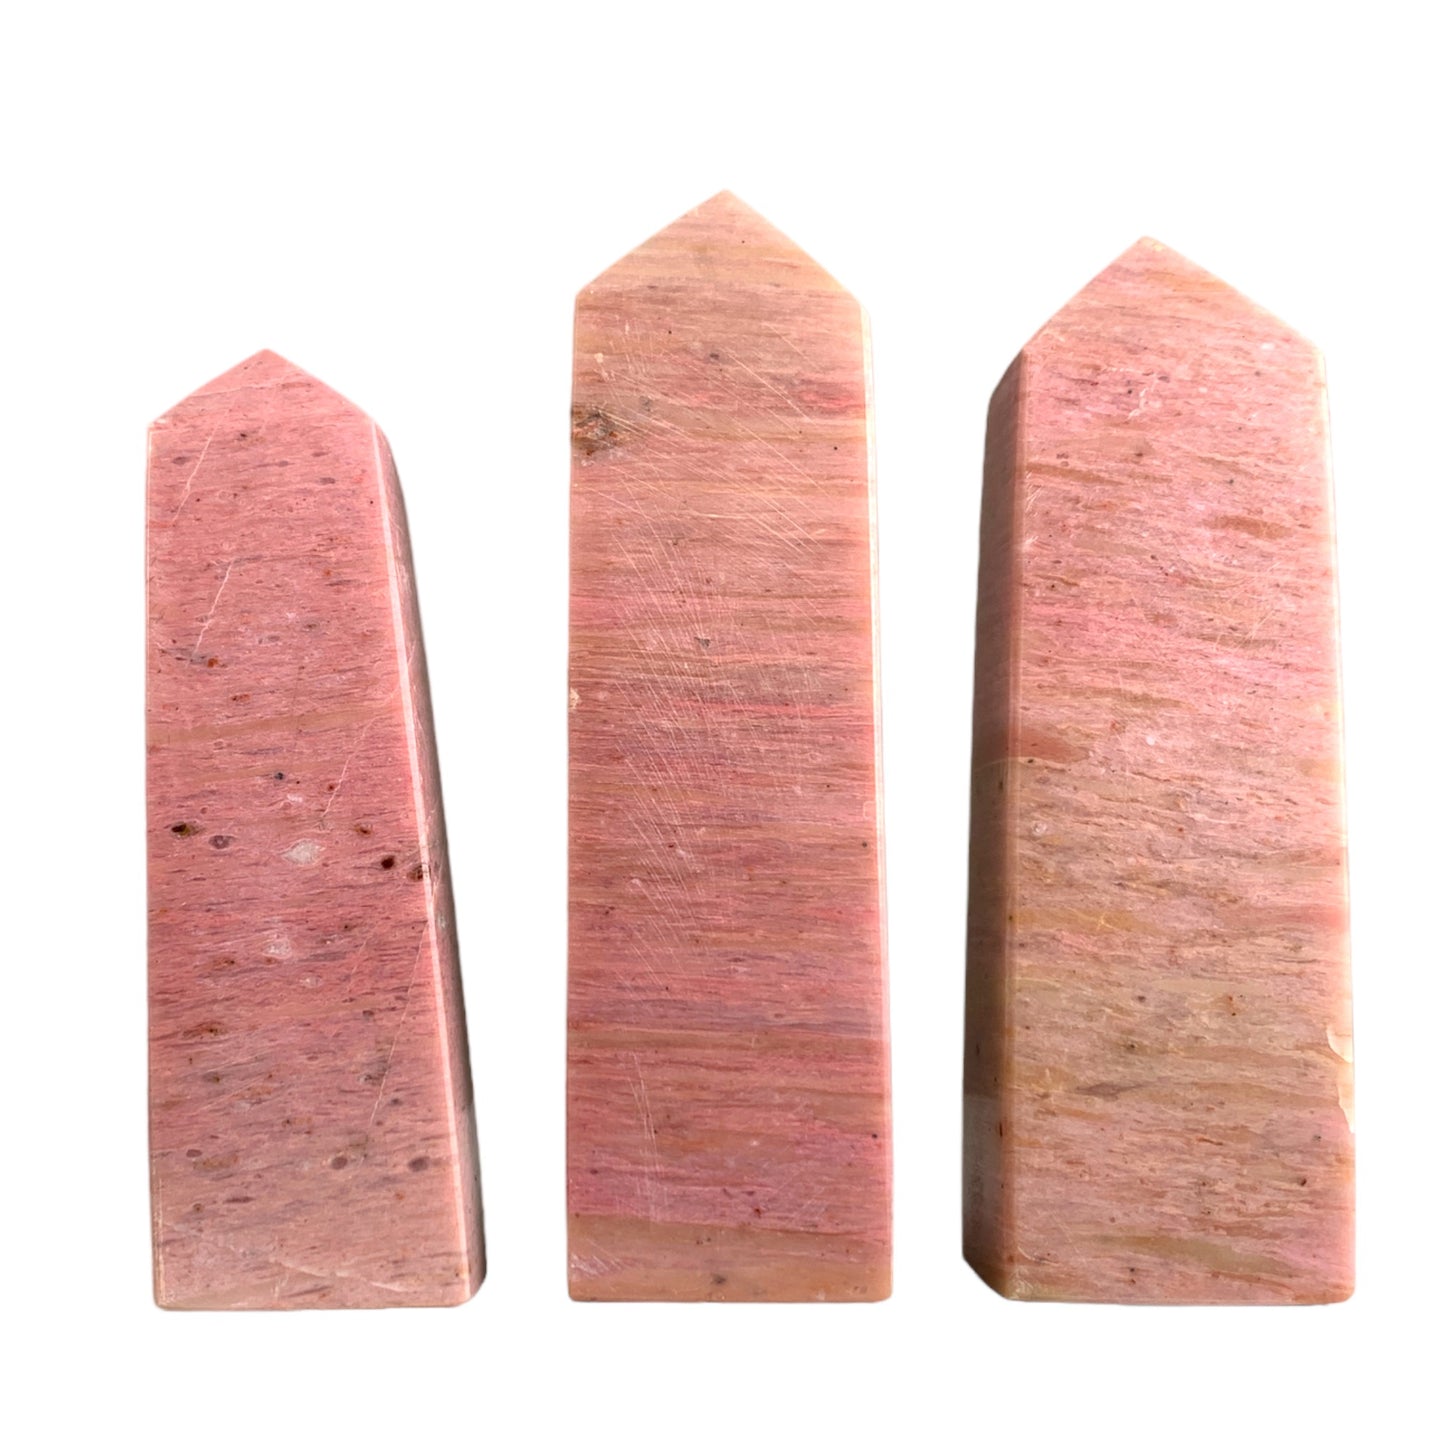 Rhodonite - Polished Towers - 80 to 100mm - Price per gram - China - NEW622